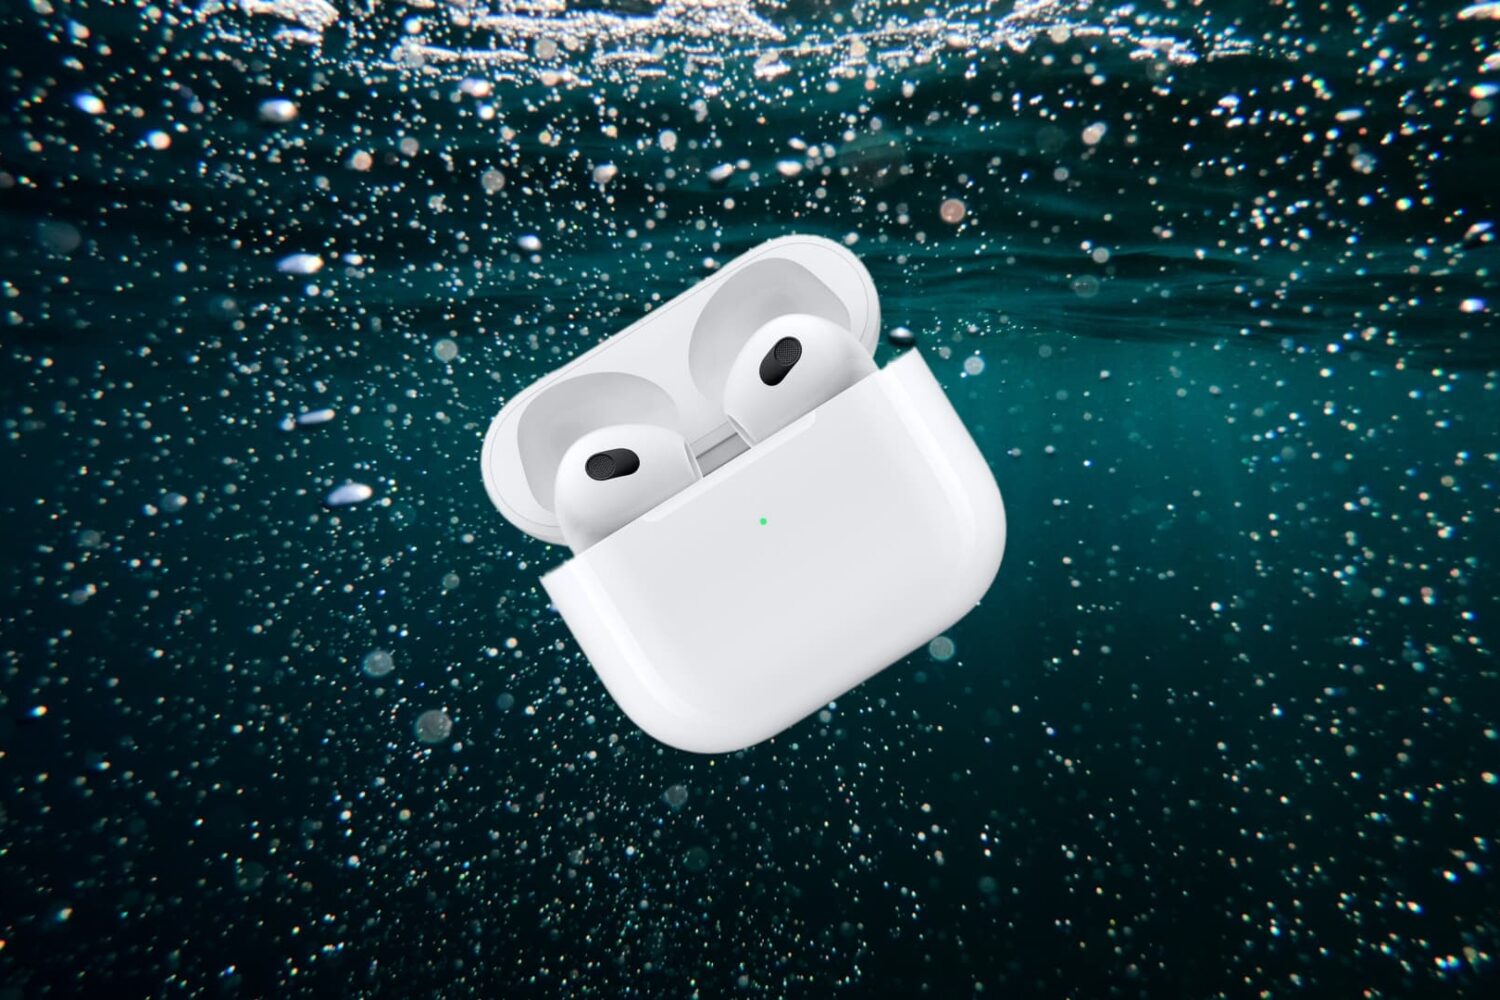 AirPods falling in water